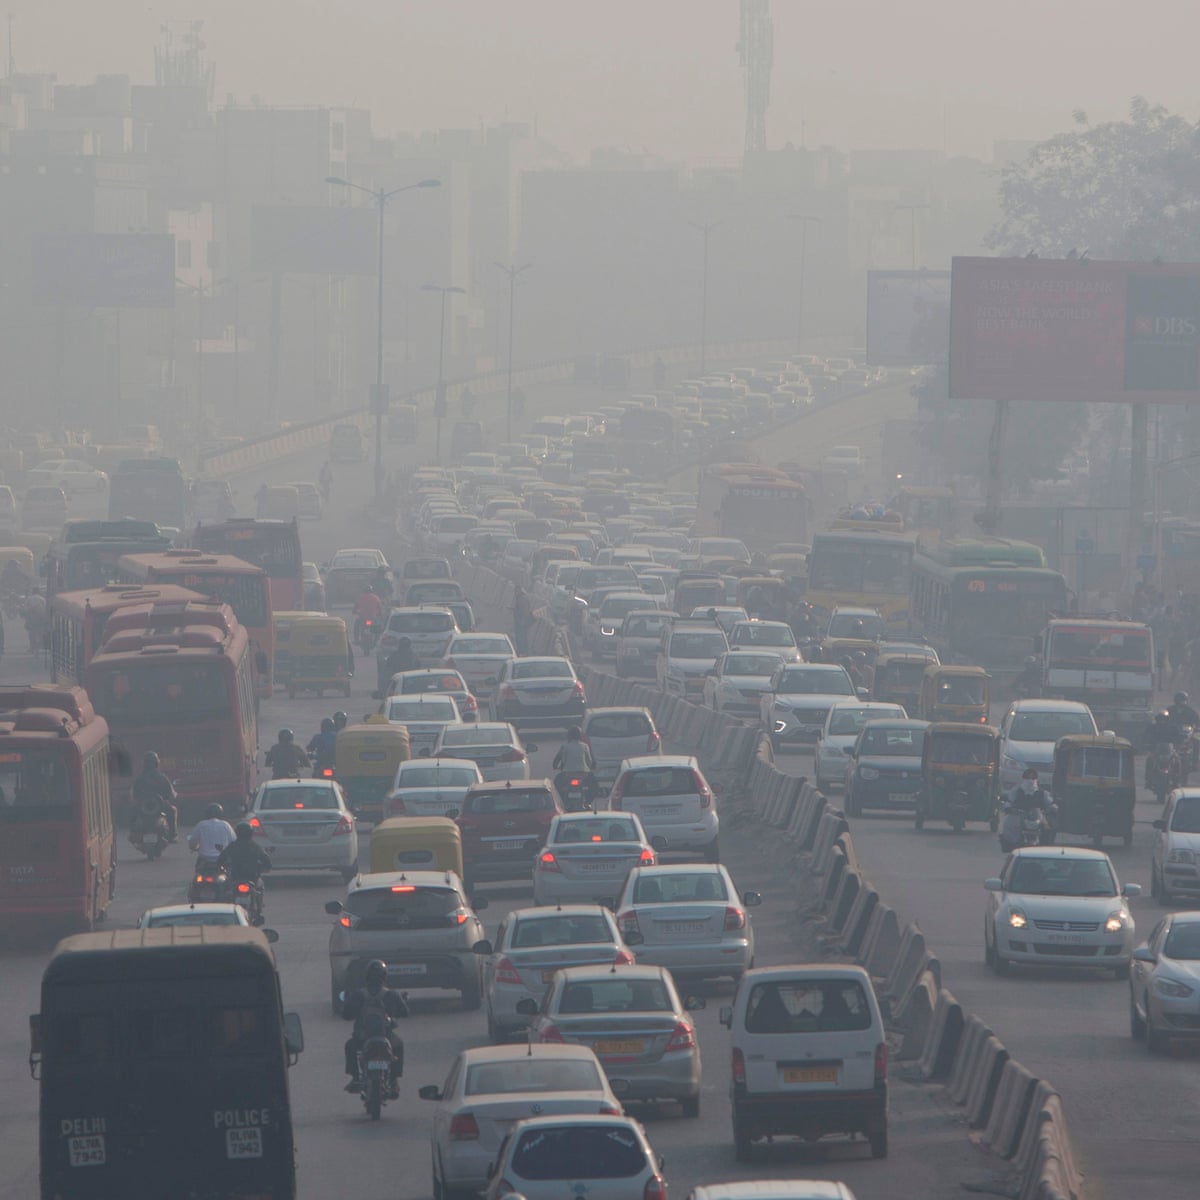 22 of world's 30 most polluted cities are in India, says | Cities | The Guardian